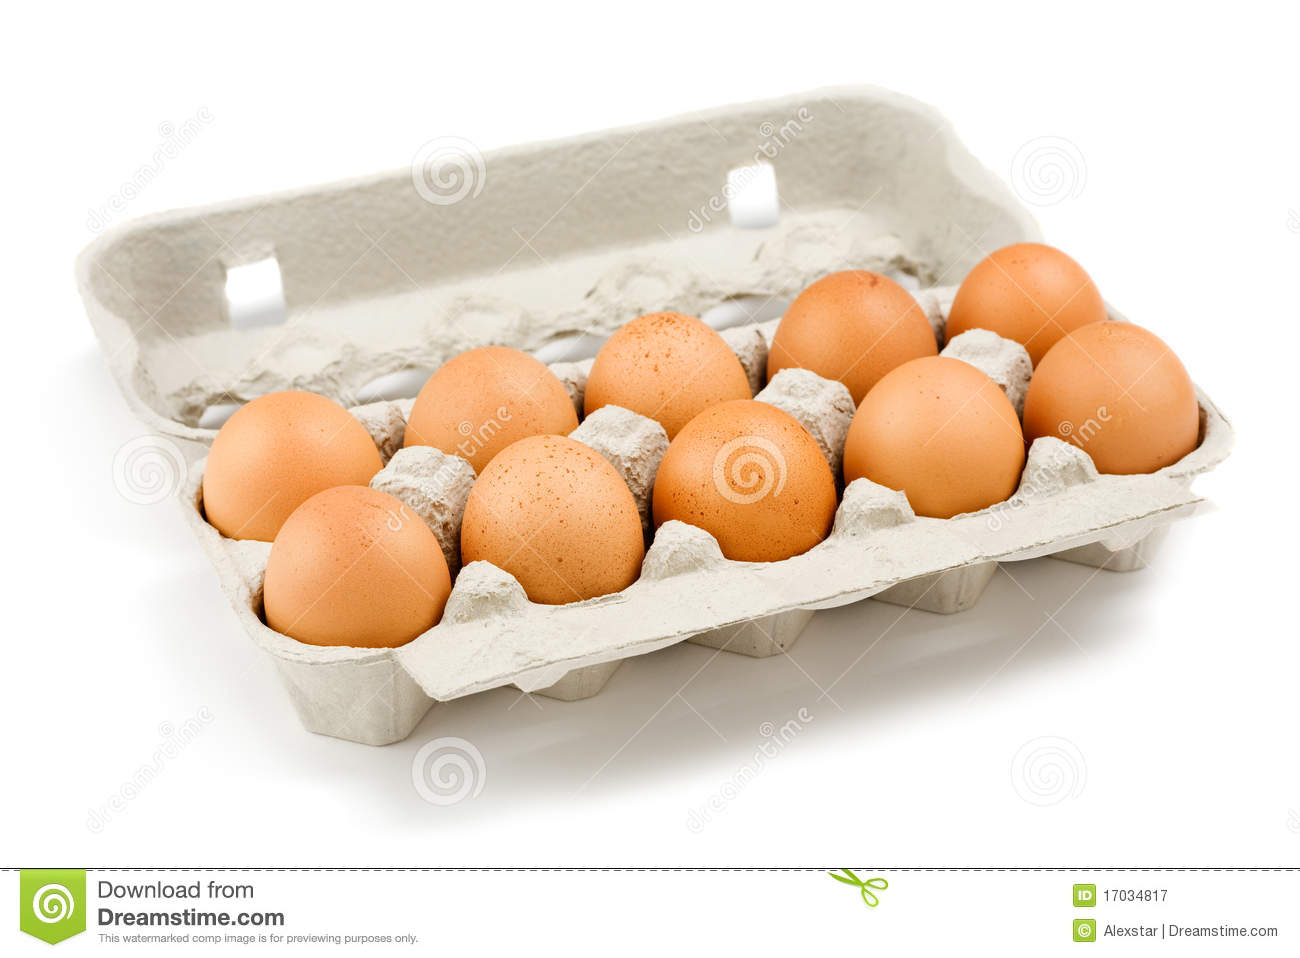 Carton Of Eggs Royalty Free Stock Photography   Image  17034817